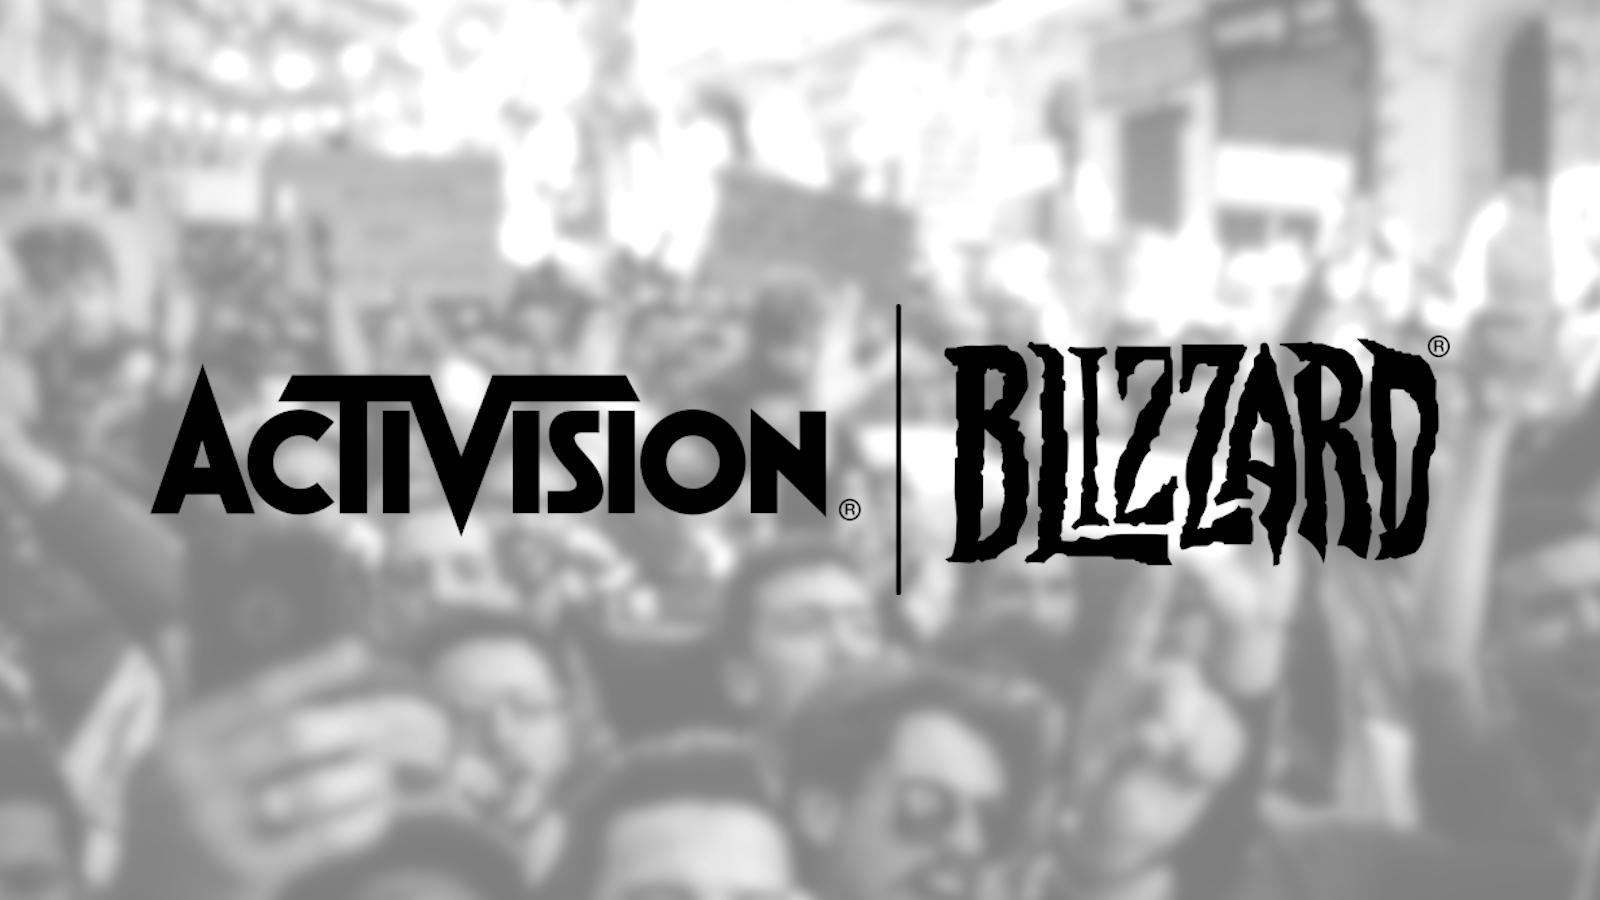 Activision Blizzard has just agreed to settle a discrimination lawsuit for a fraction of its yearly earnings